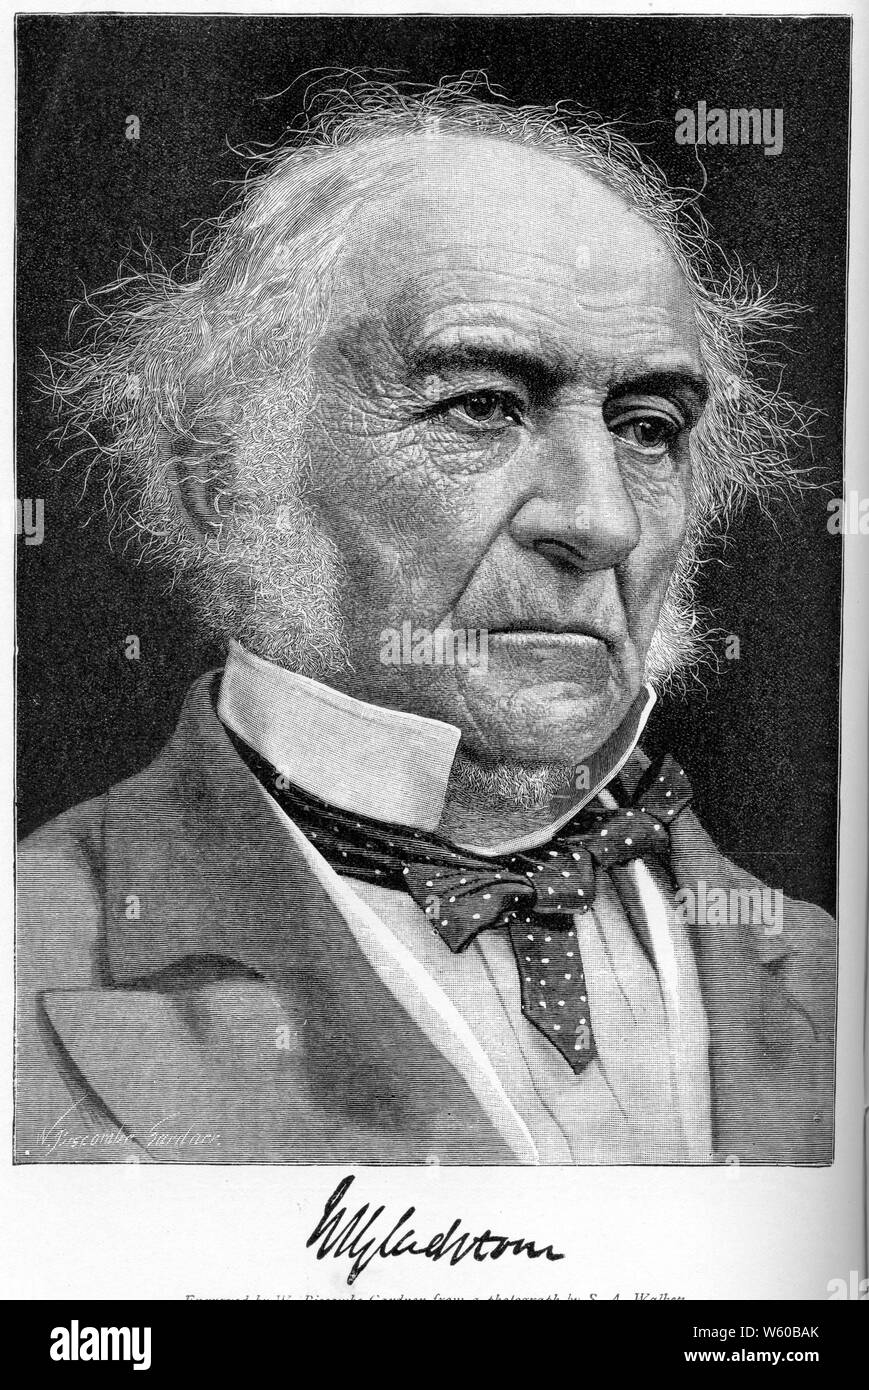 William Gladstone (1809-1898), c1892. By William Biscombe Gardner (1847-1919) after Samuel Alexander Walker (1841-1922). William Ewart Gladstone (1809-1898) was a British Liberal statesman who served as Prime Minister on four separate occasions. Gladstone was also Britain's oldest Prime Minister and was 84 when he resigned for the last time. Stock Photo